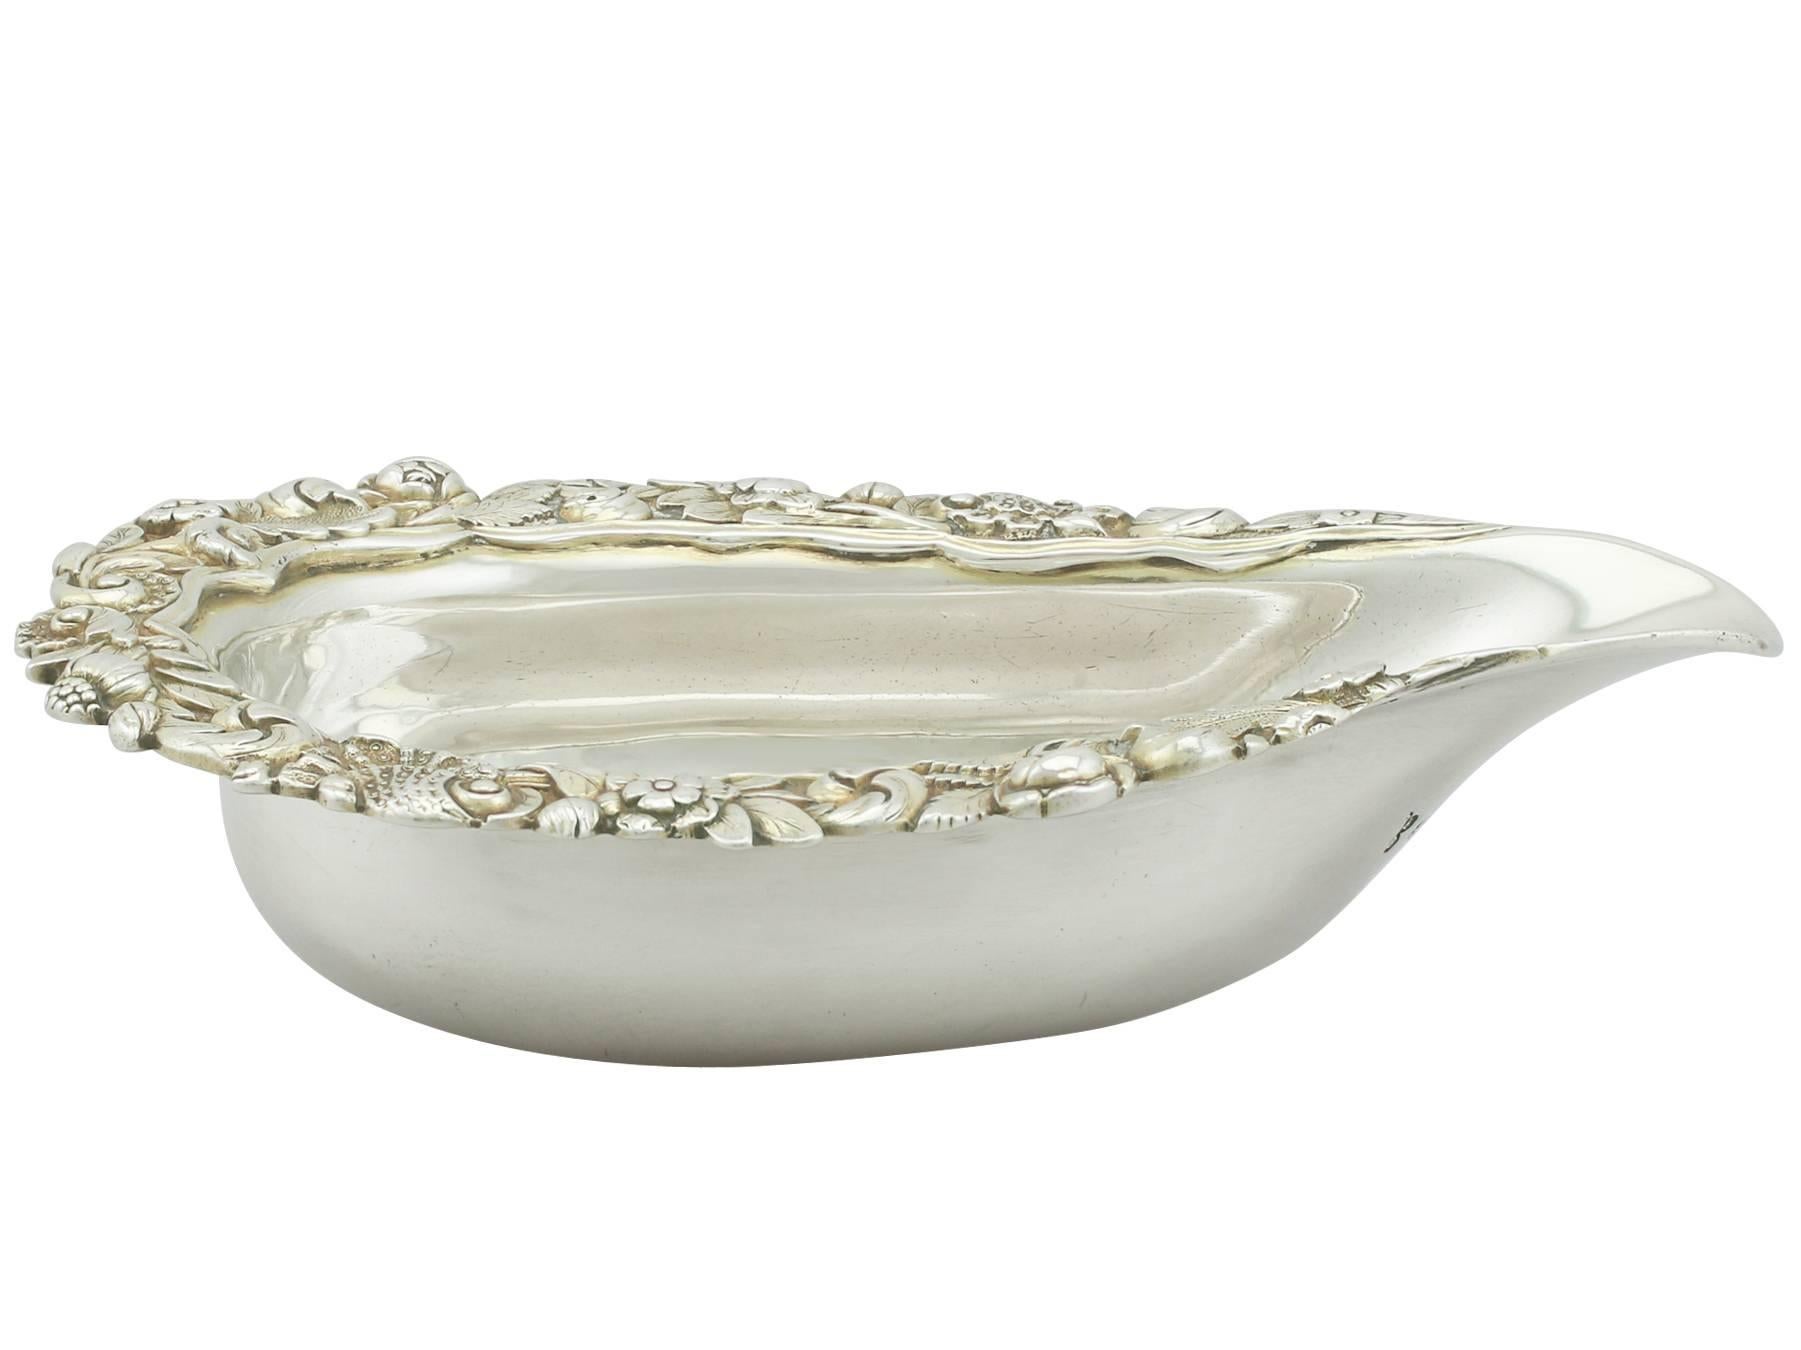 An exceptional, fine and impressive antique George IV English sterling silver pap boat; an addition to our silver dining collection

This fine antique George IV sterling silver pap boat or infant feeder has an oval plain boat shaped form.

The